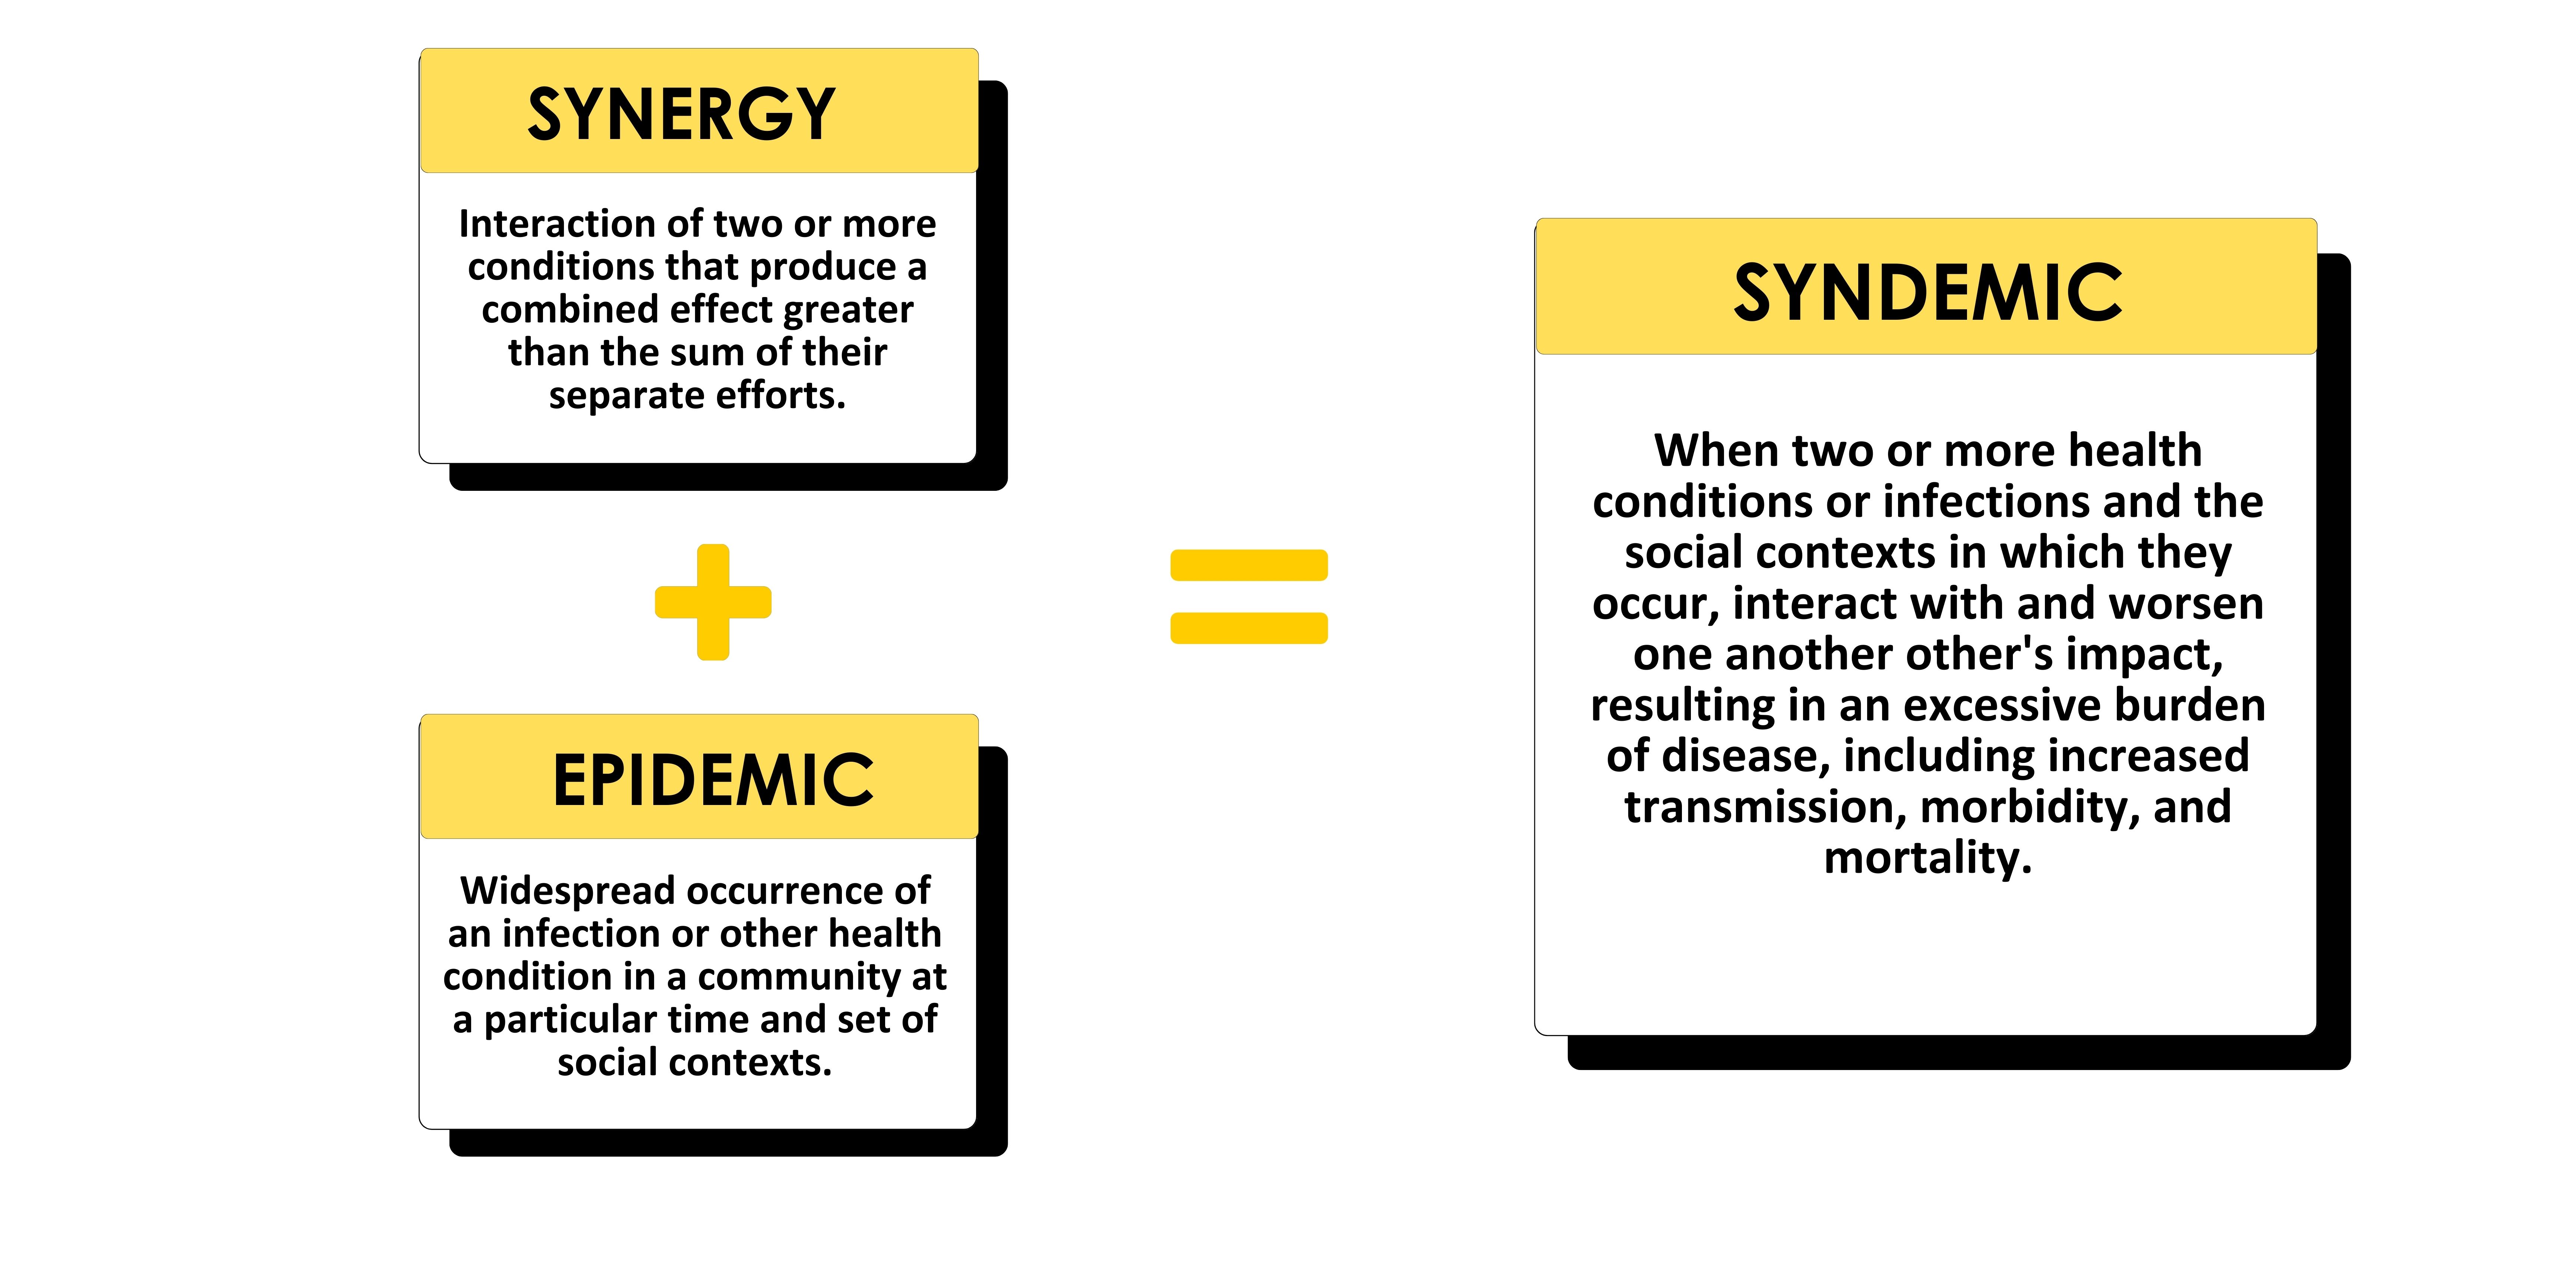 Syndemic Definition